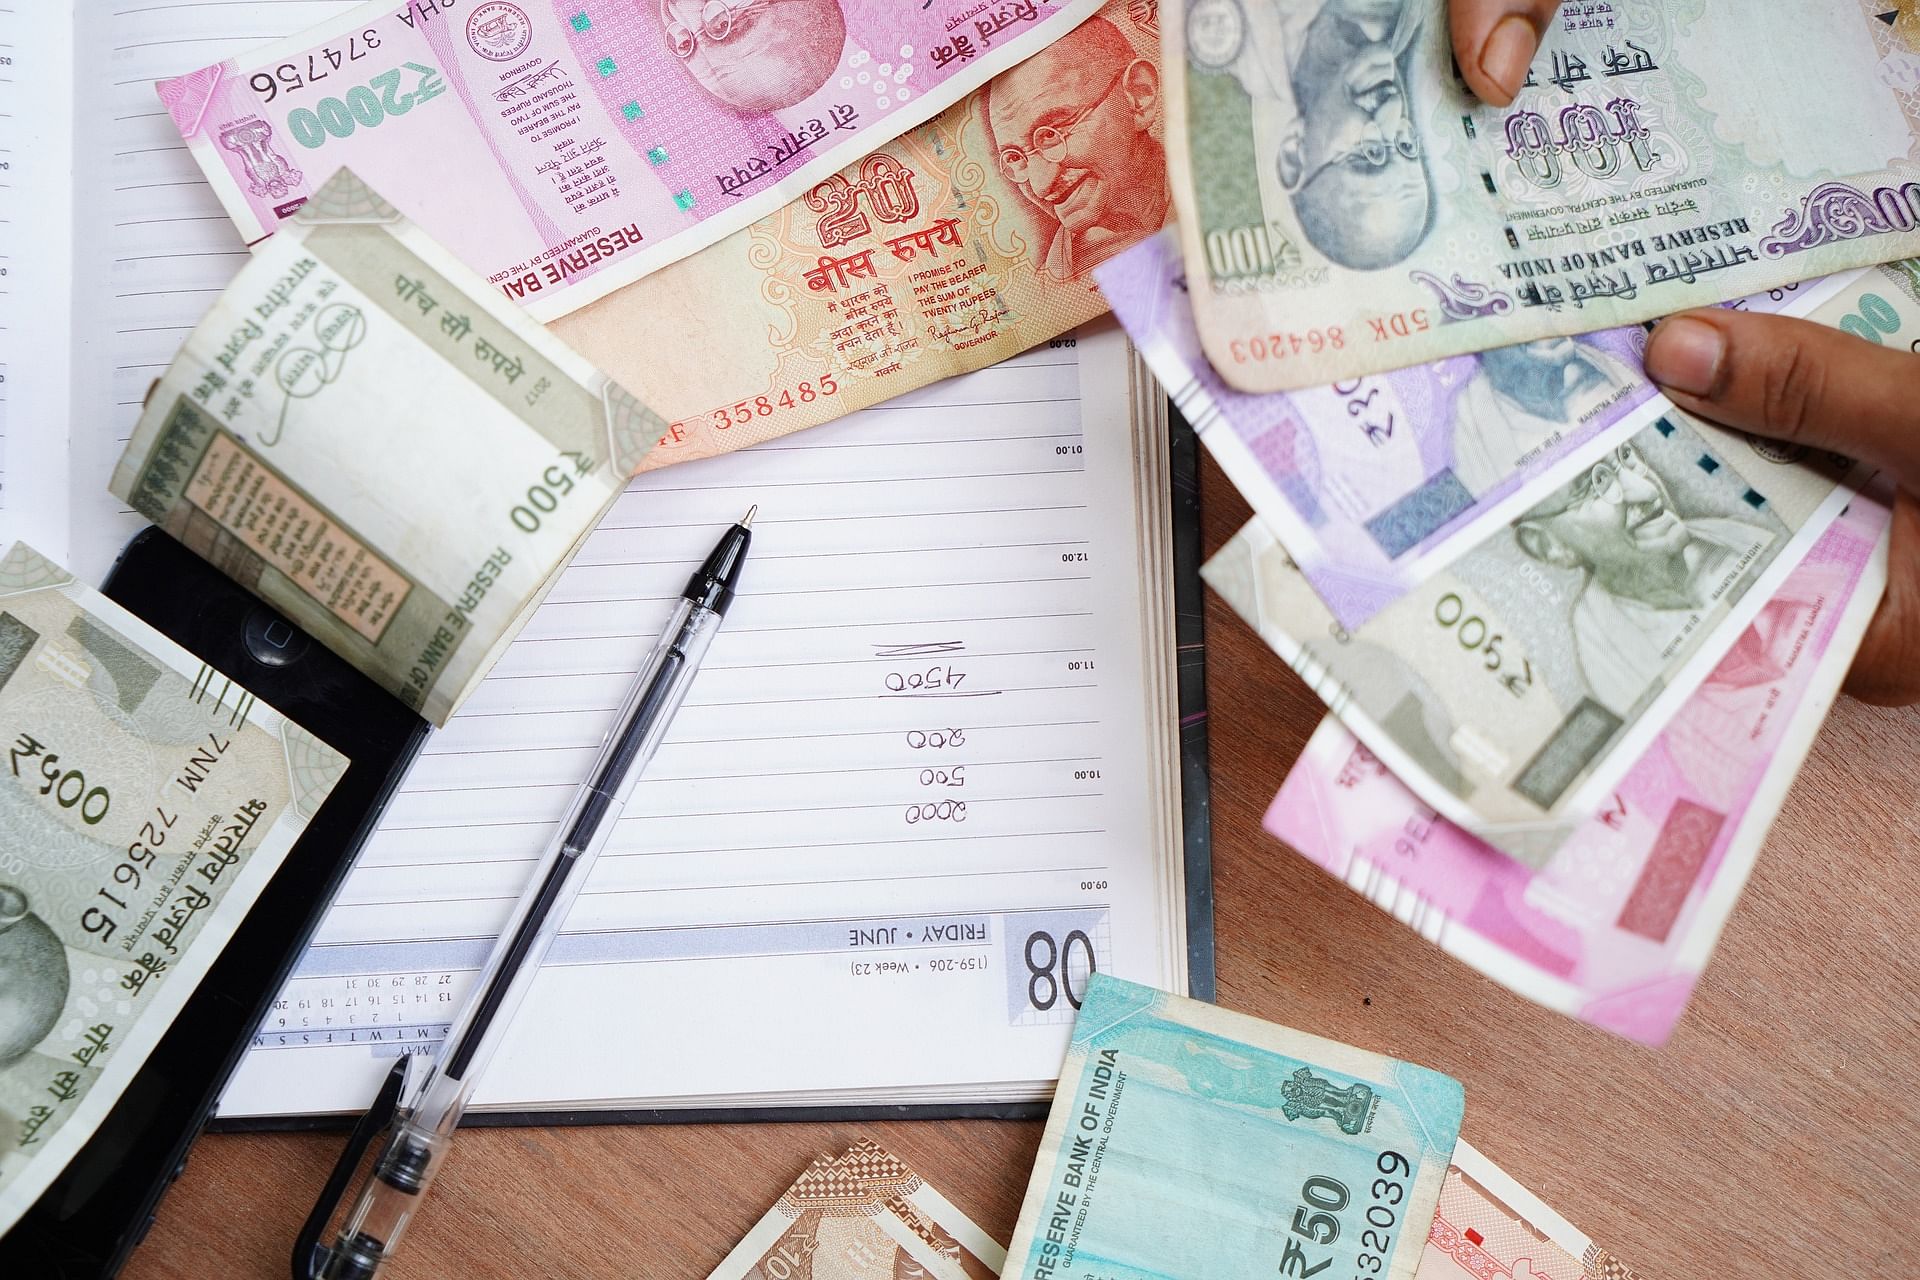 “A lot of departments and CPSEs have been mobilised to speed up asset monetisation,” a senior government official told Business Standard. (Image by Shameer Pk from Pixabay)